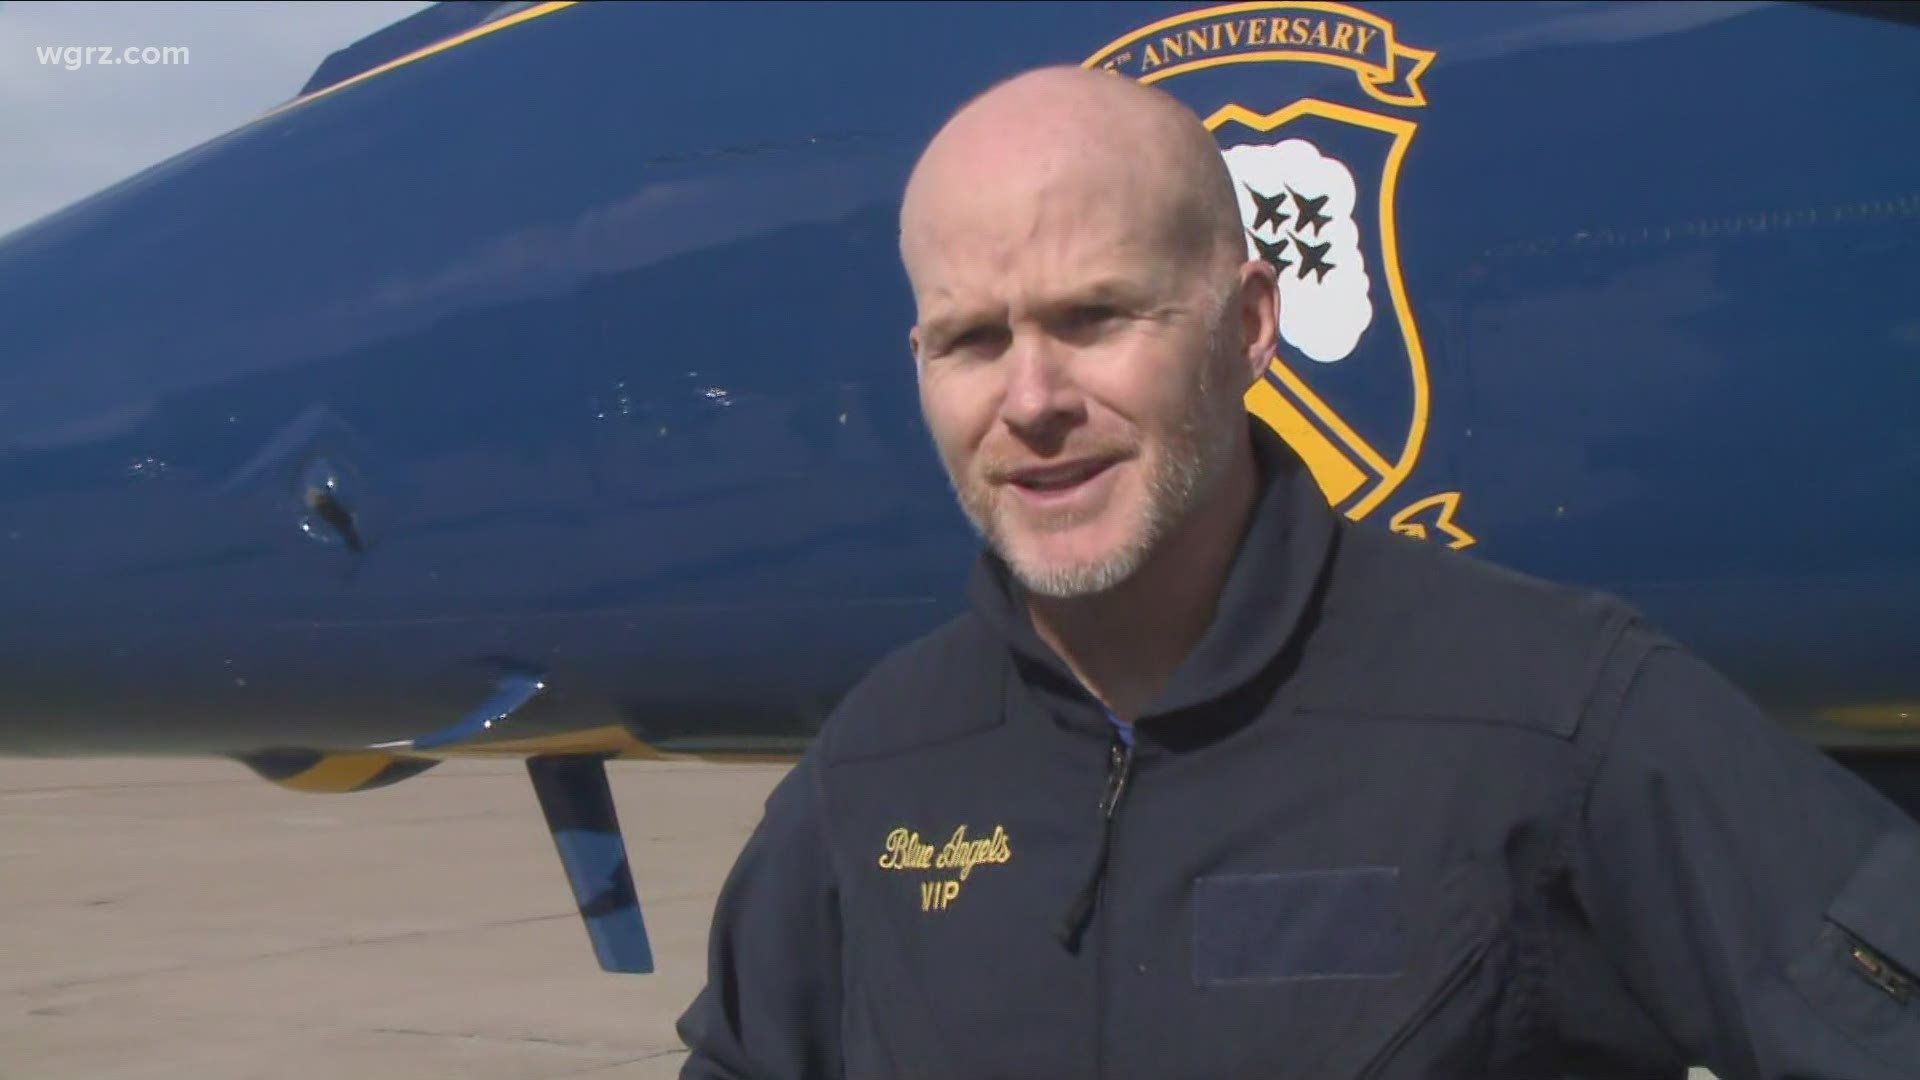 Sean McDermott reacts to his flight with the Blue Angels in Niagara Falls.